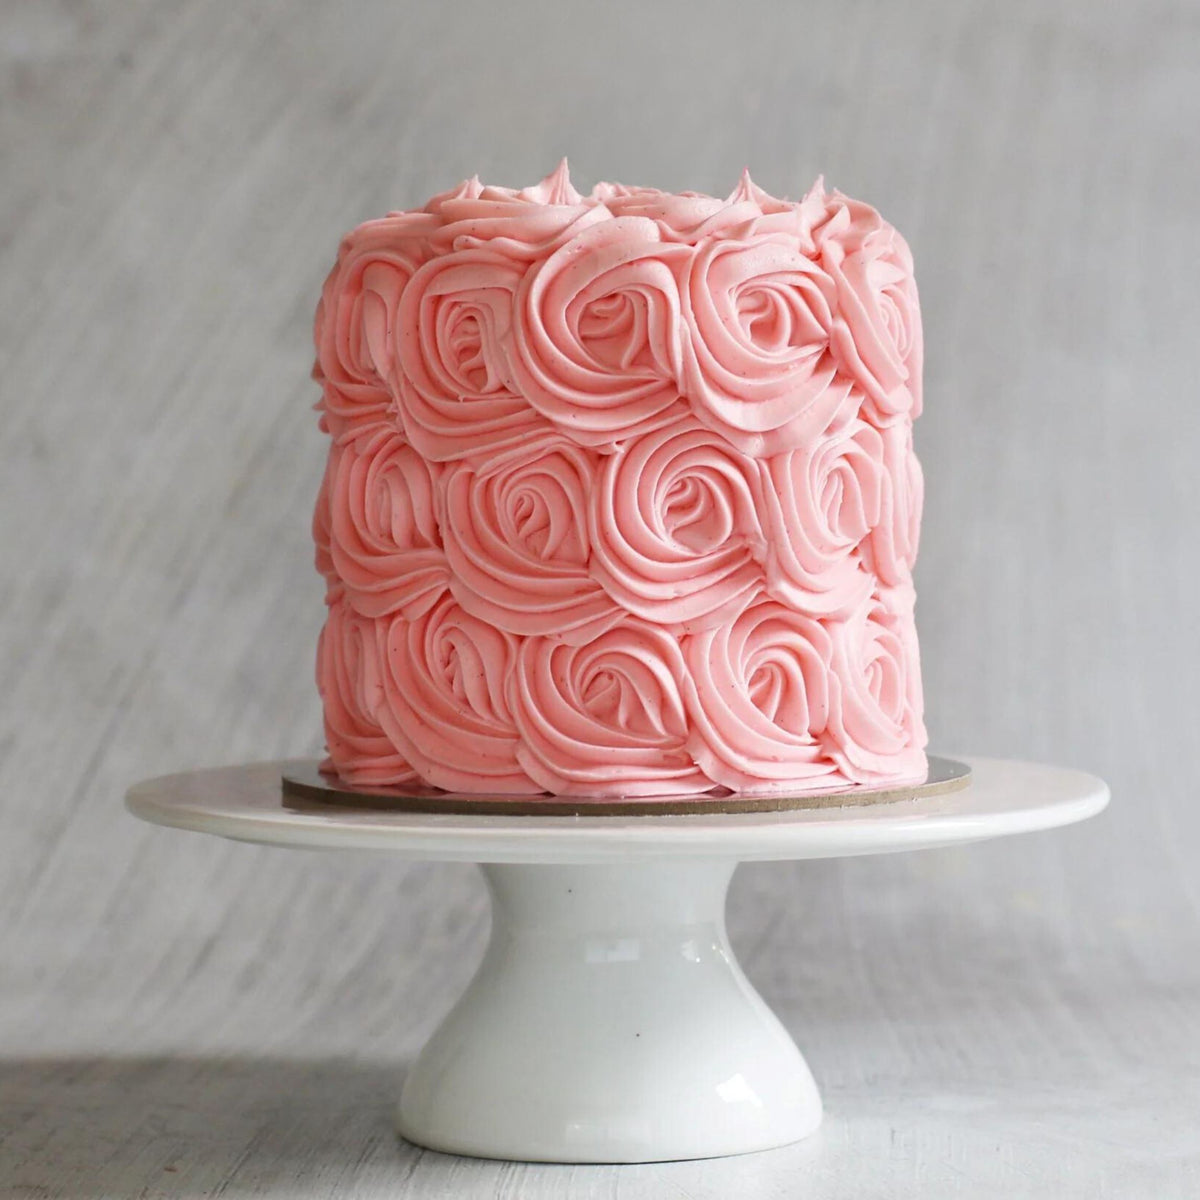 Pink Swirl Cake Cakes The Cupcake Queens 